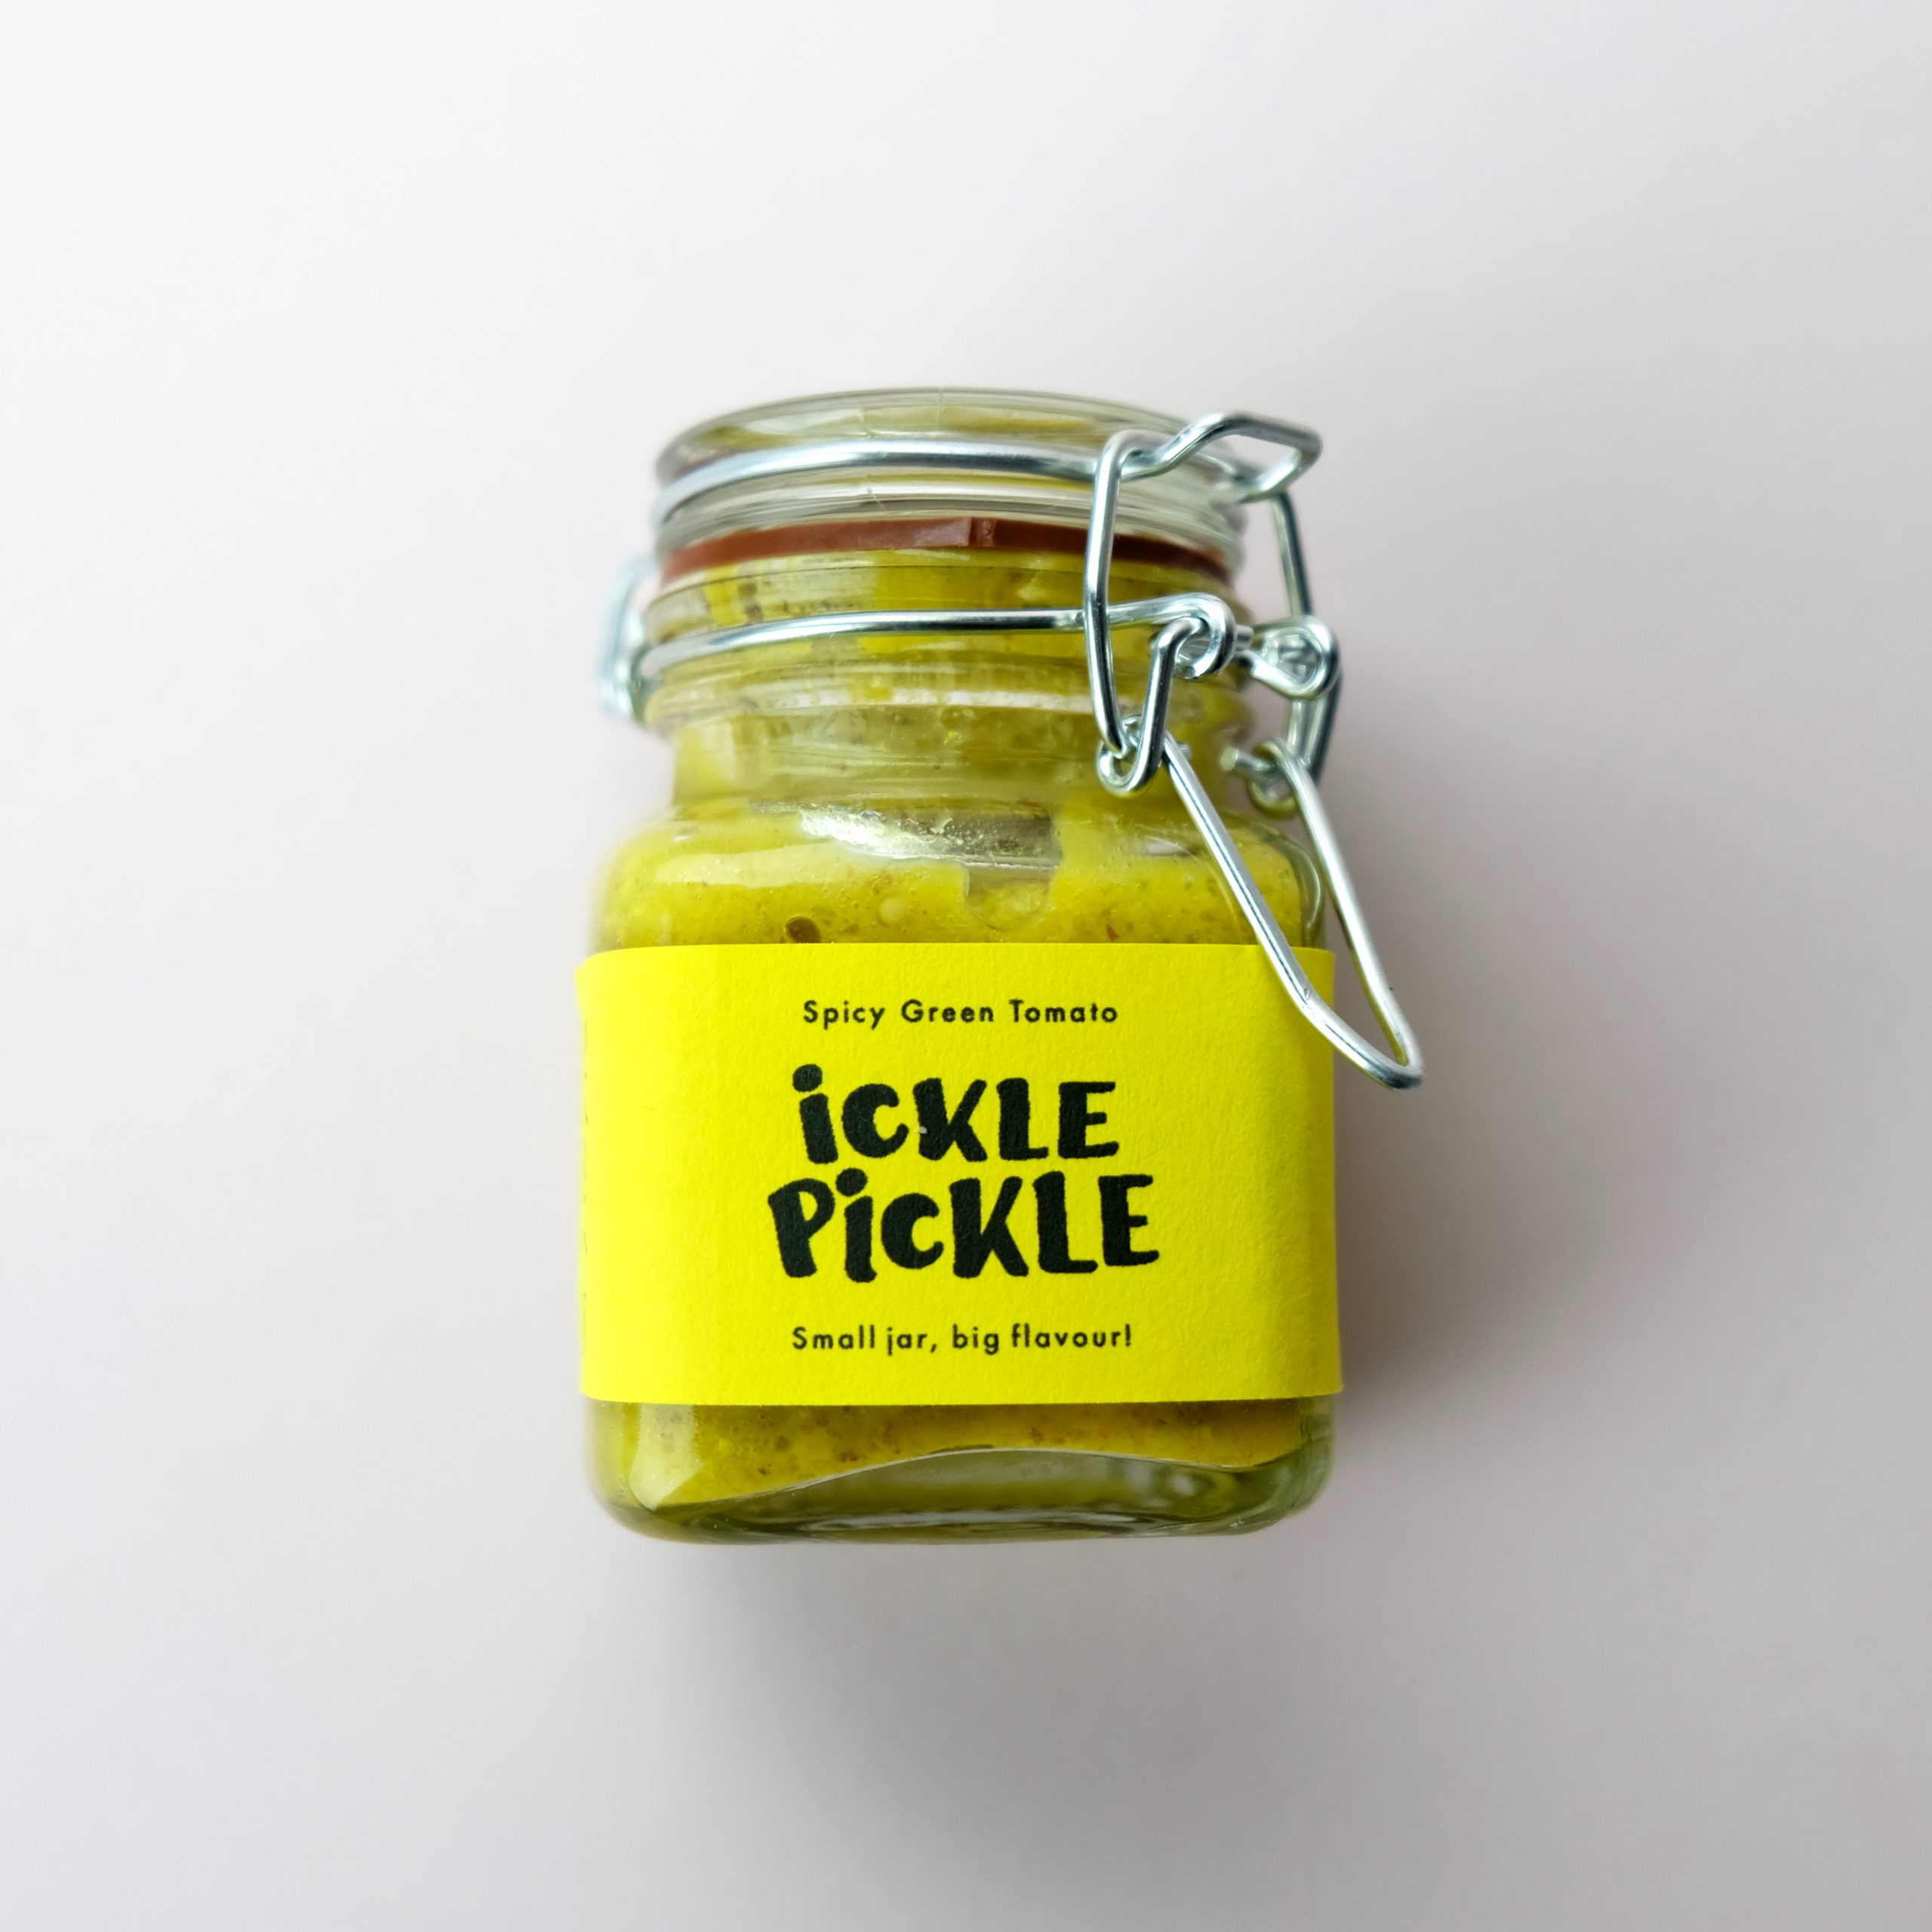 Ickle Pickle